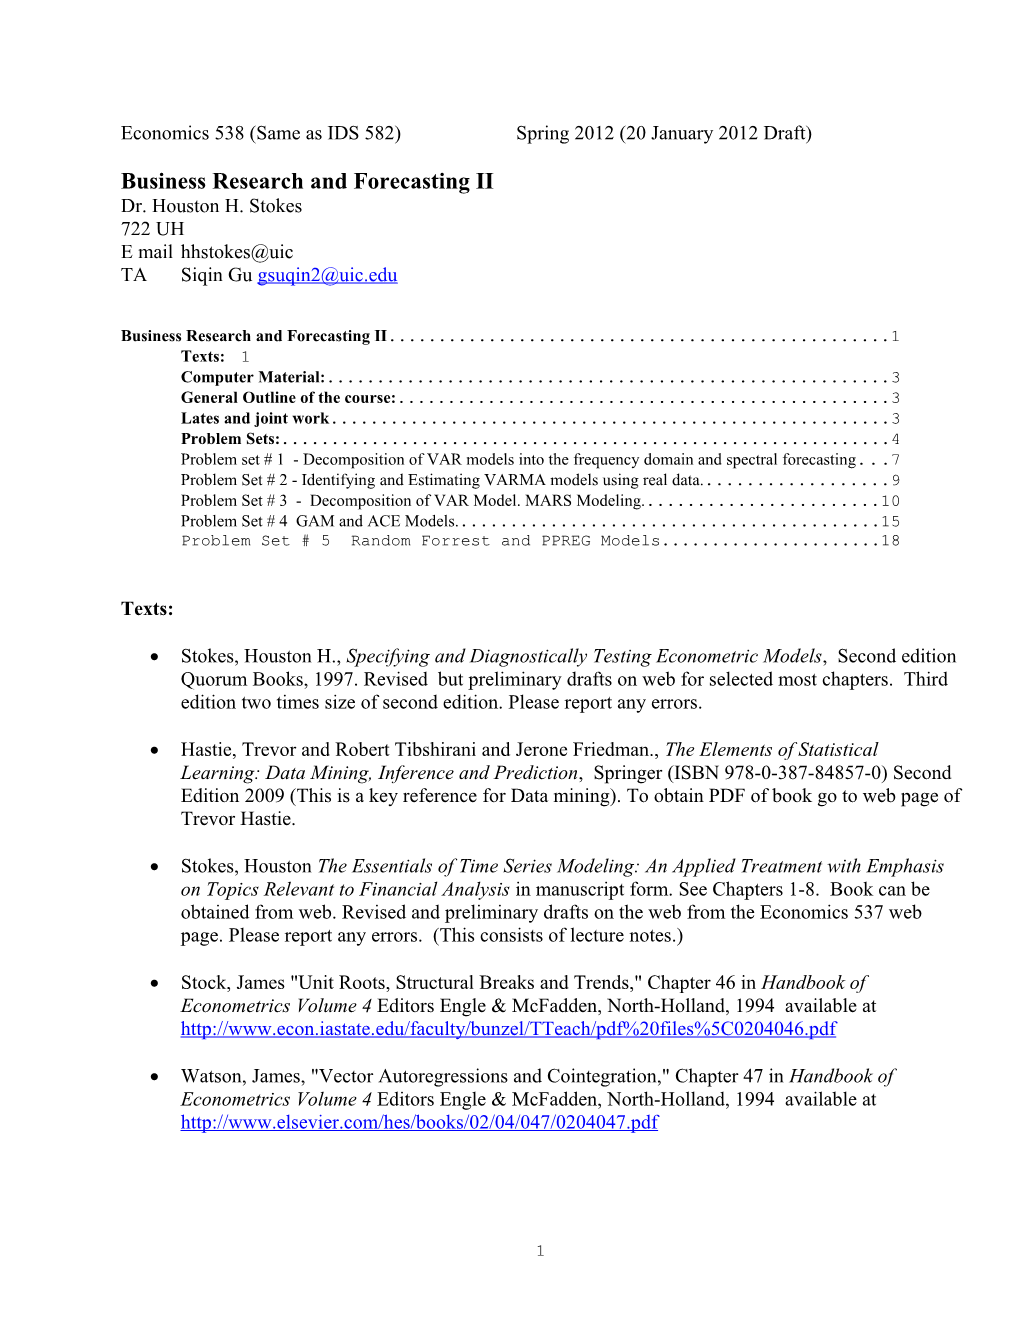 Business Research and Forecasting II